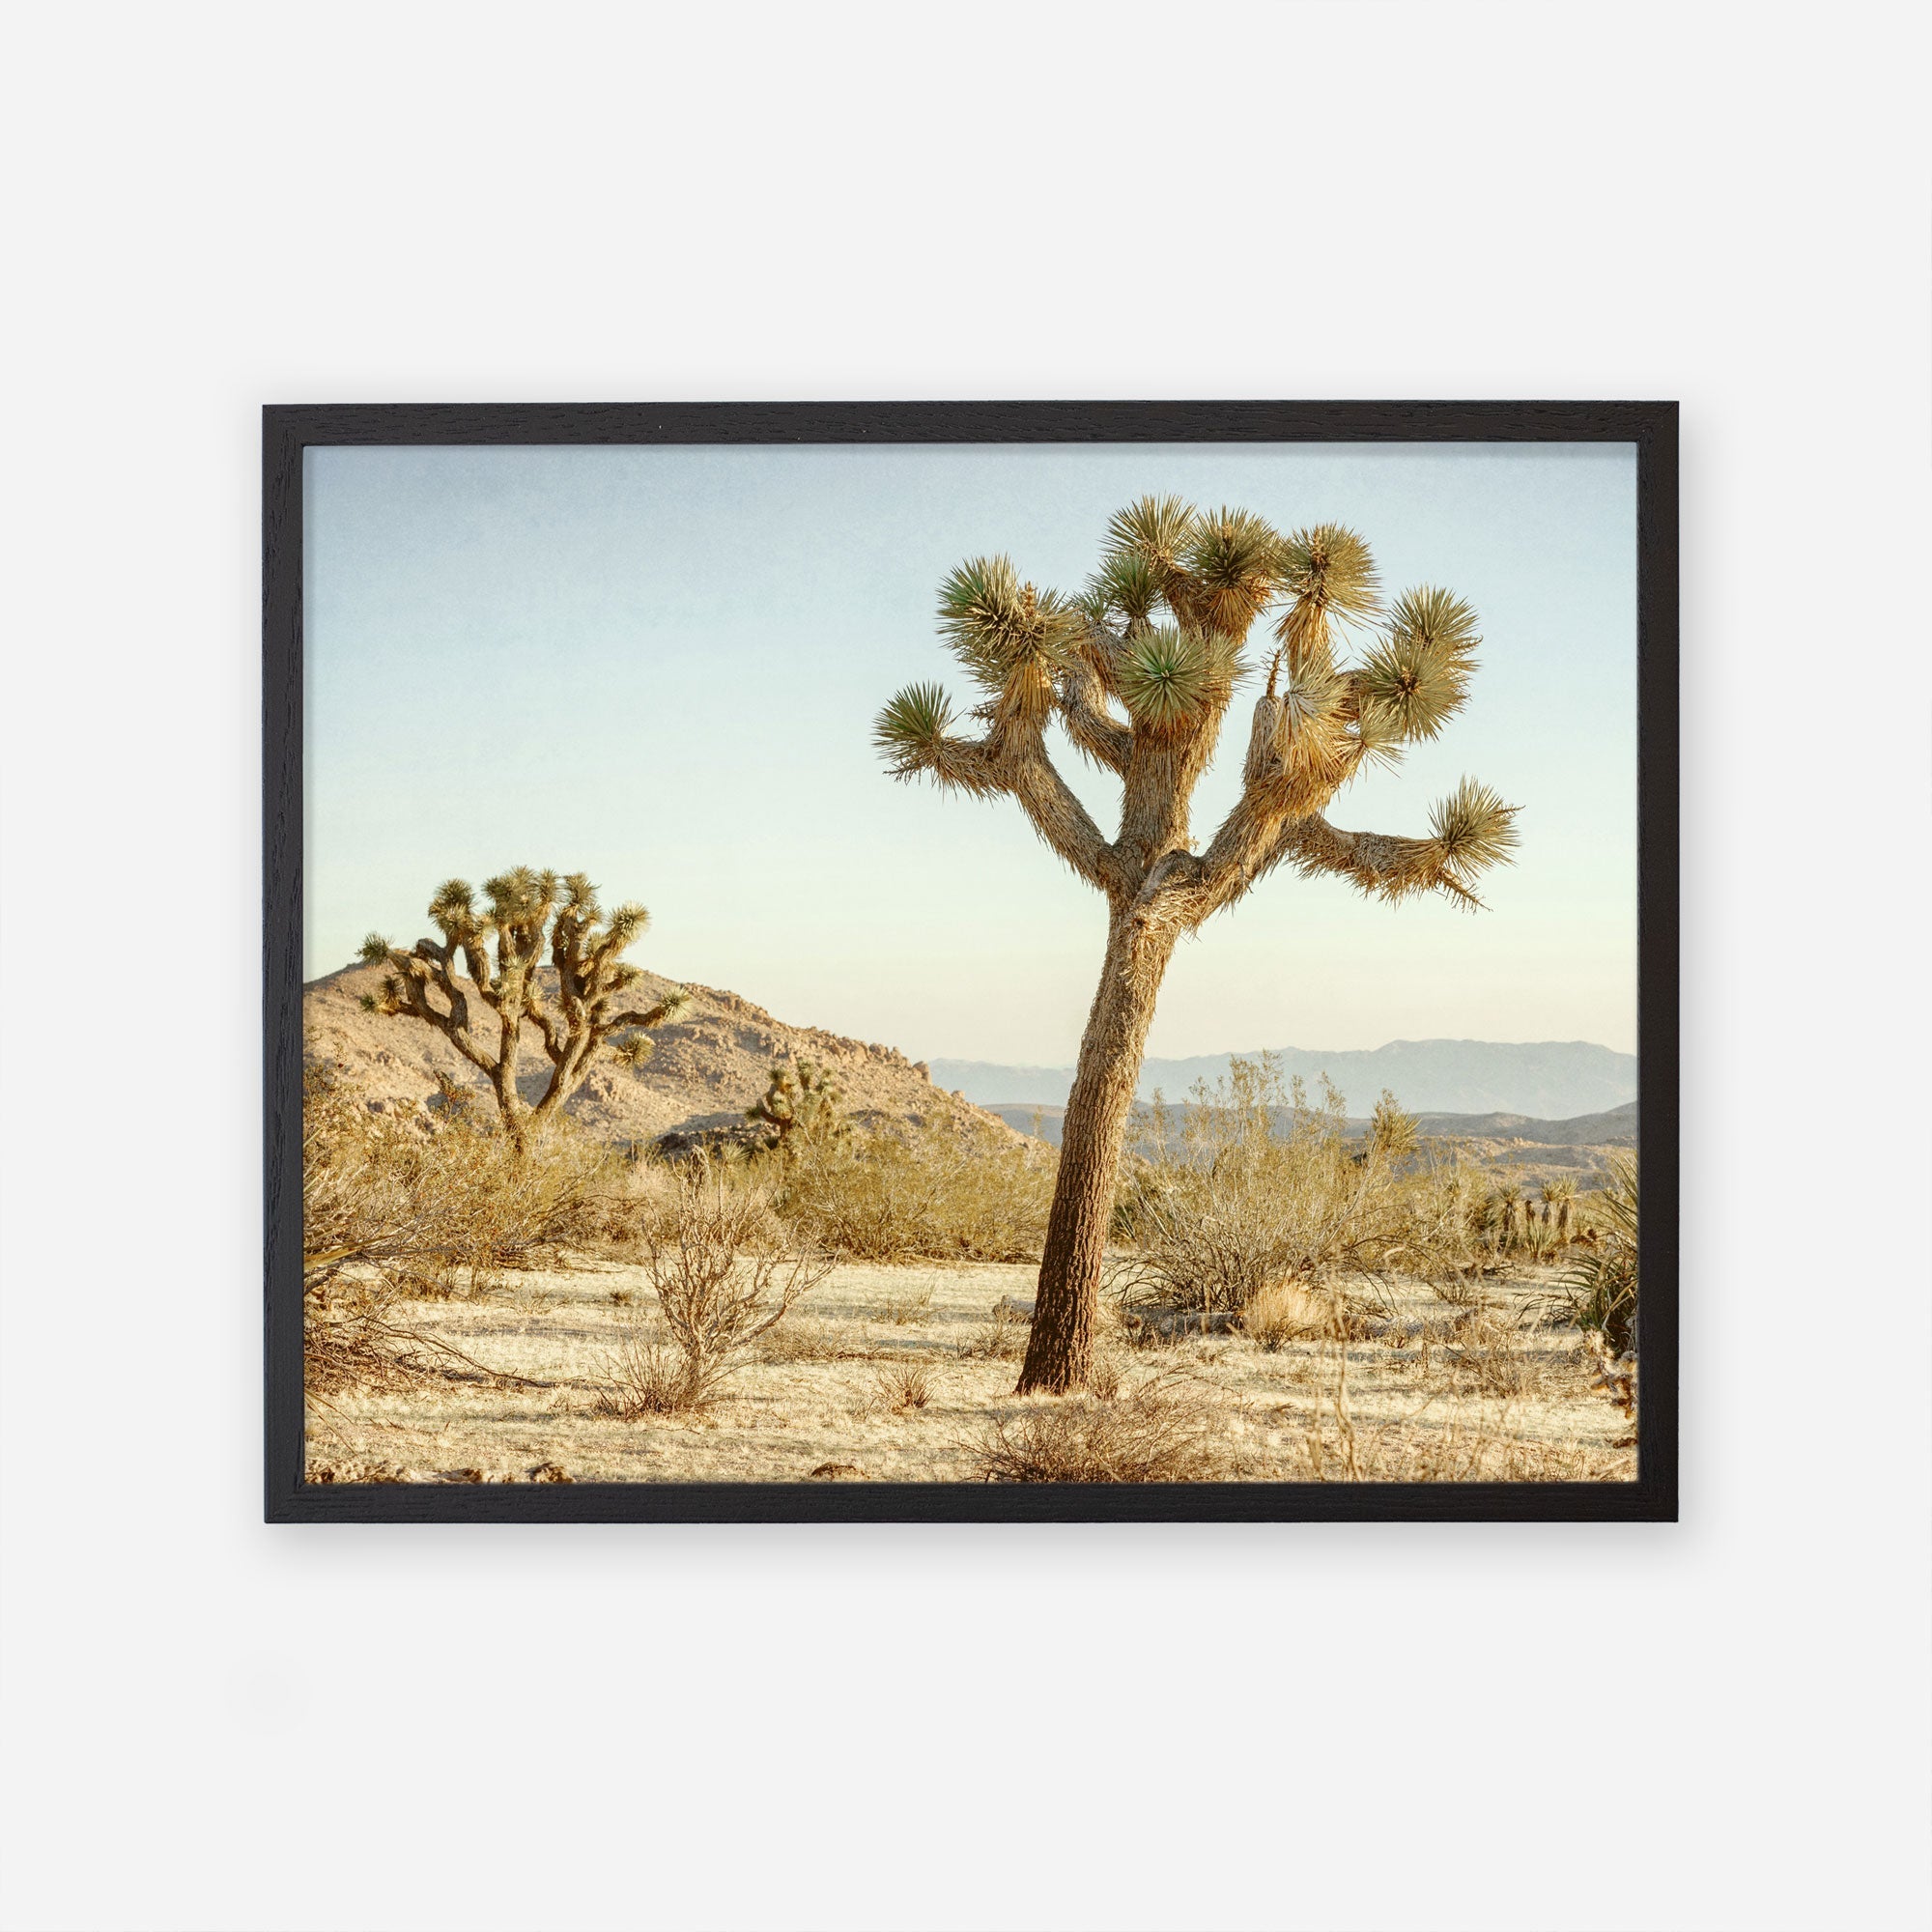 A framed photograph of a Joshua Tree Print titled &#39;Mighty Joshua&#39; standing prominently in Joshua Tree National Park, with sparse vegetation and distant mountains under a clear sky by Offley Green.